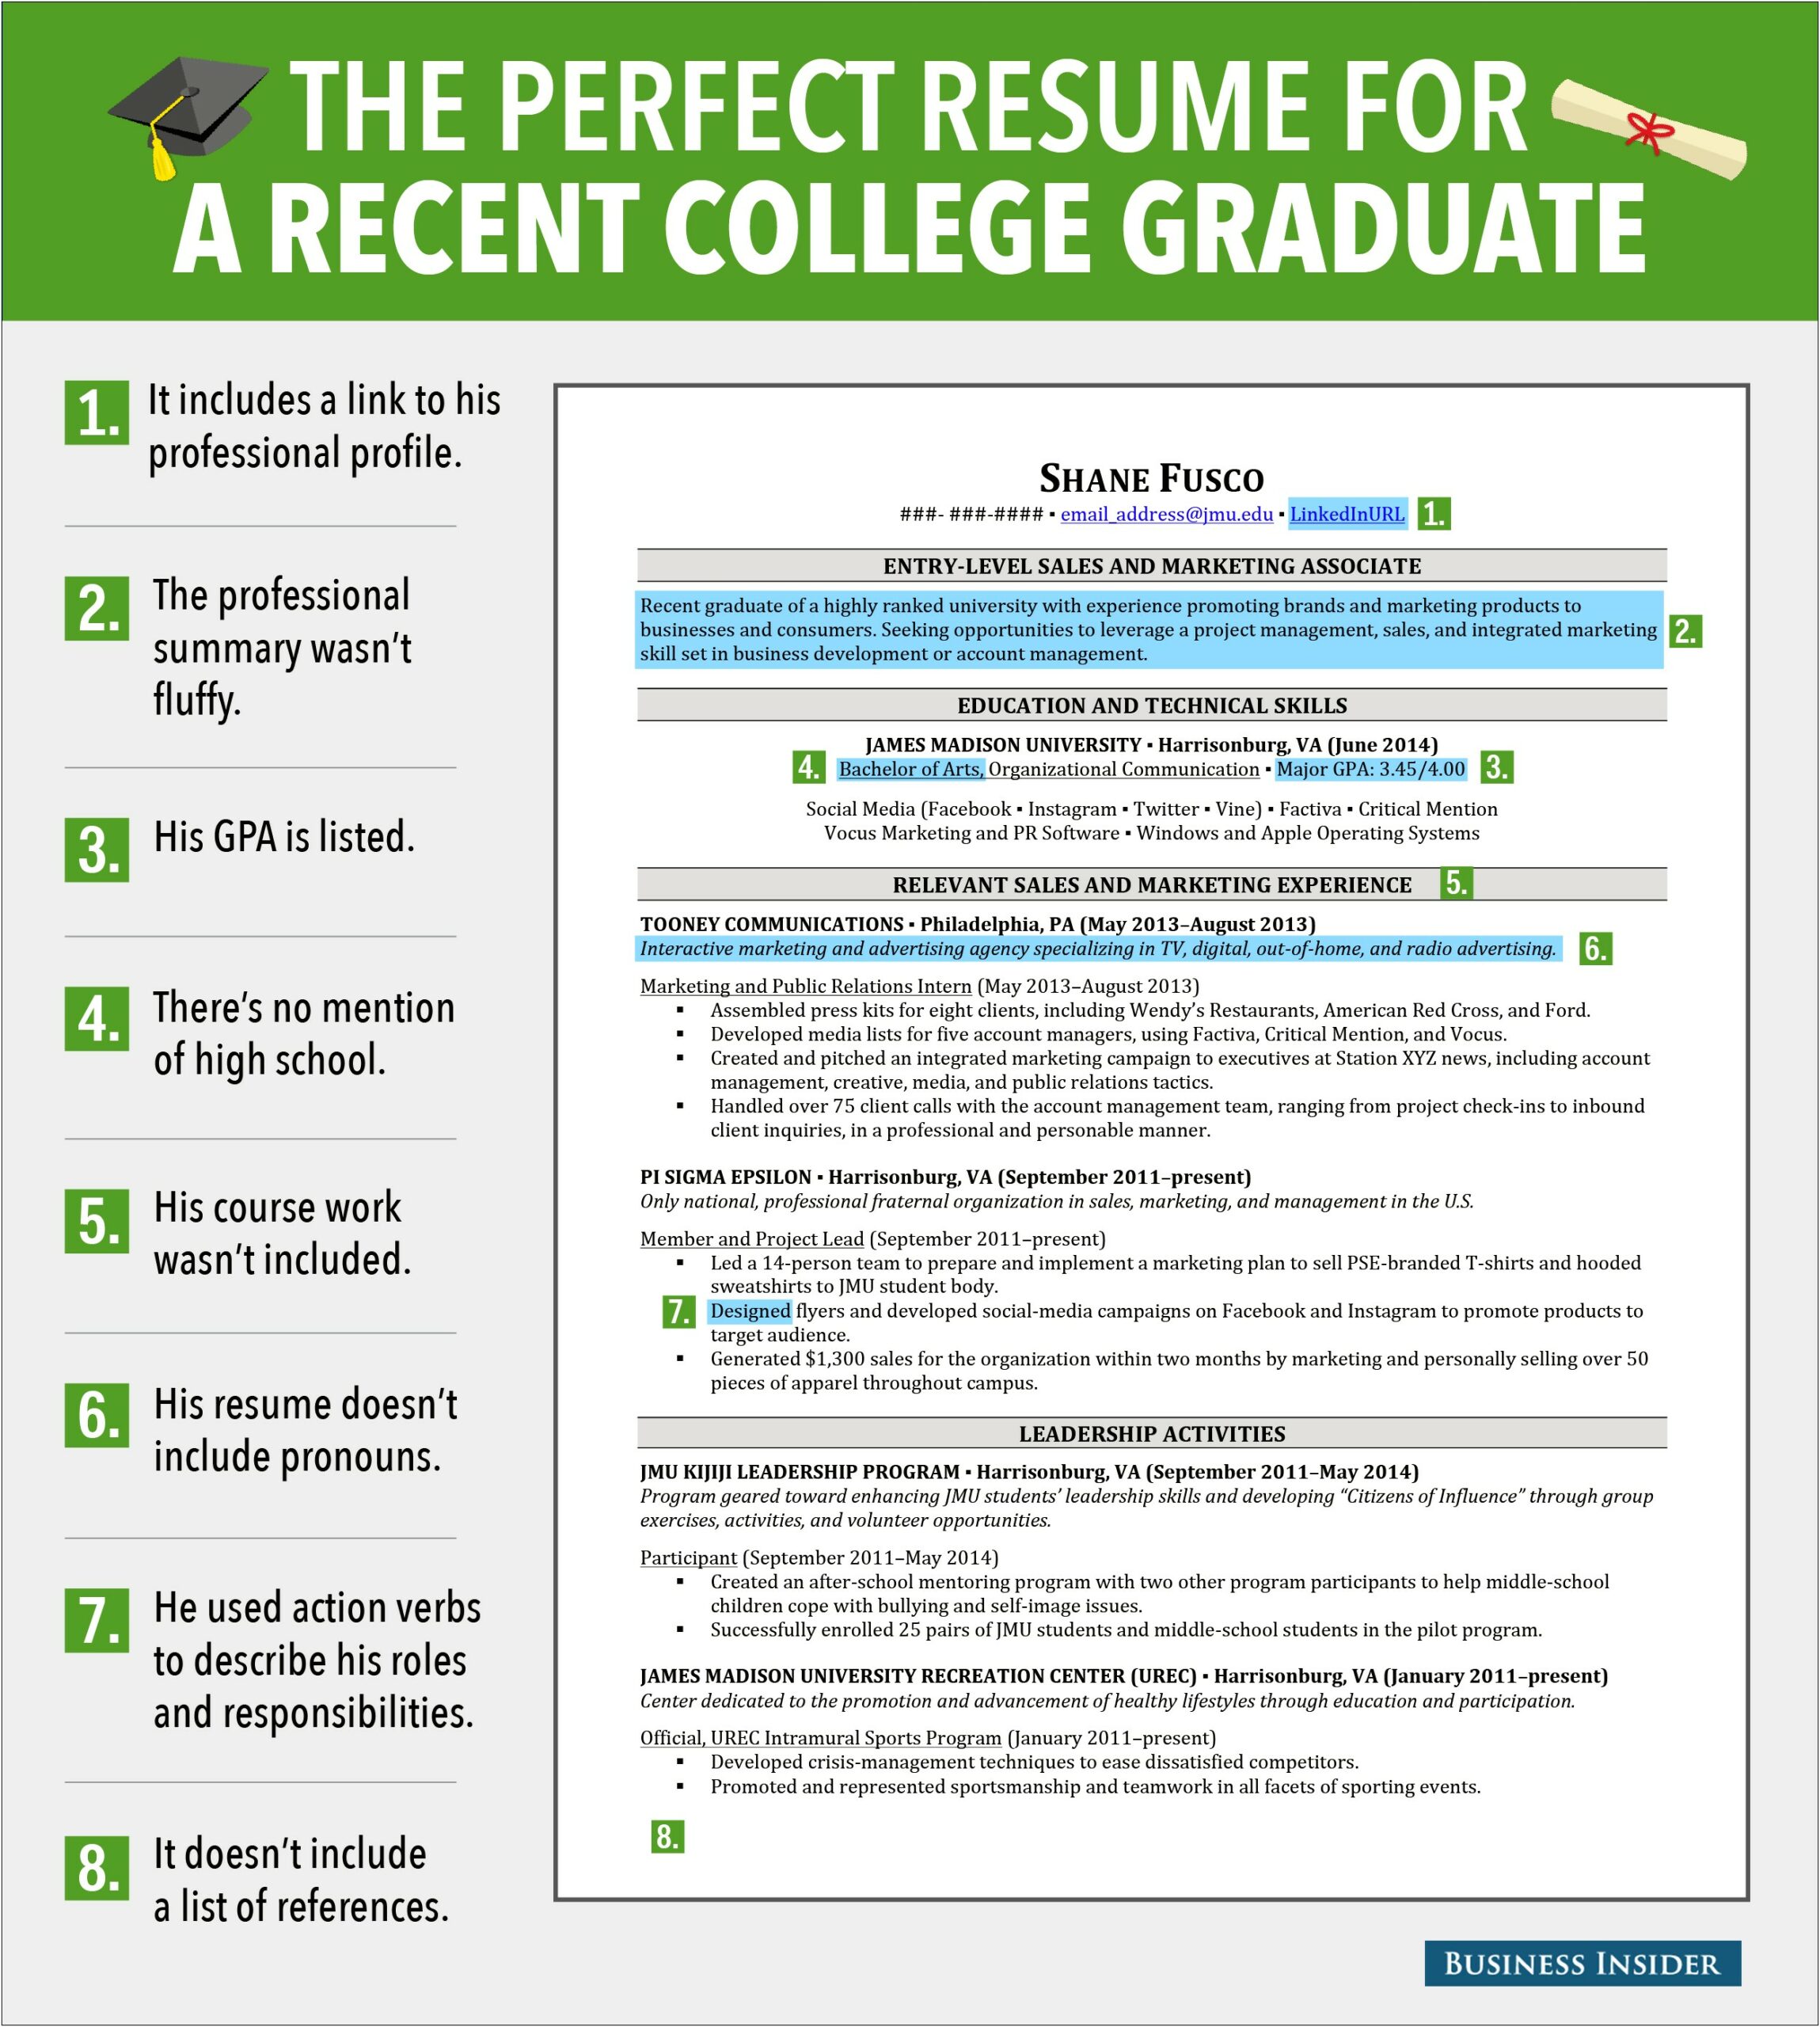 The Best Resumes Example For College Graduates